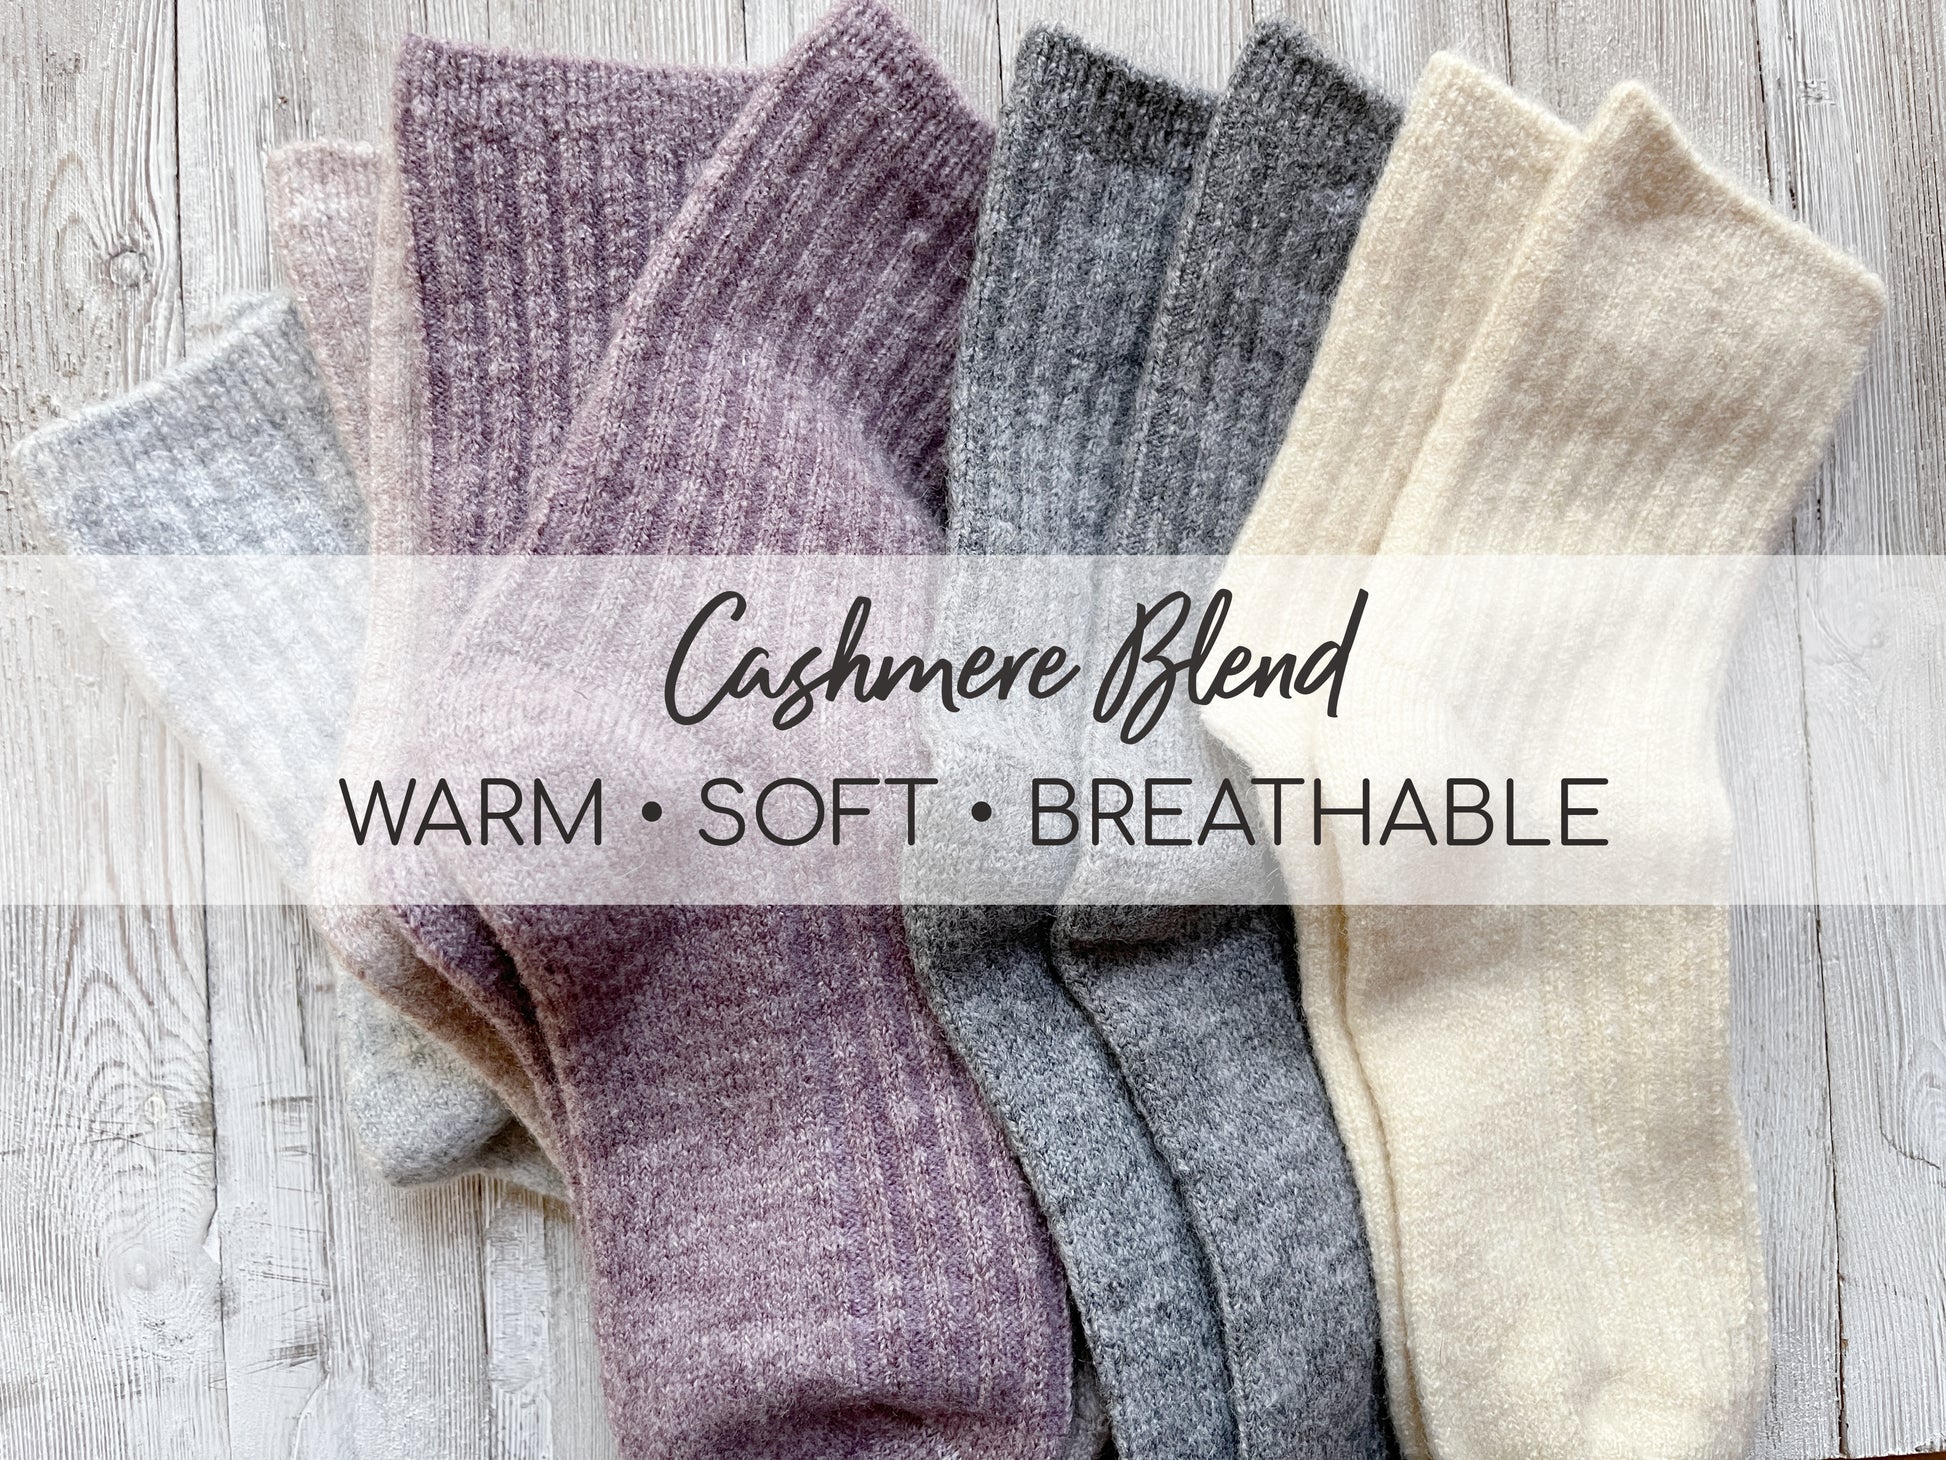 Cashmere socks  Shop Made in Canada cashmere wool socks – econica